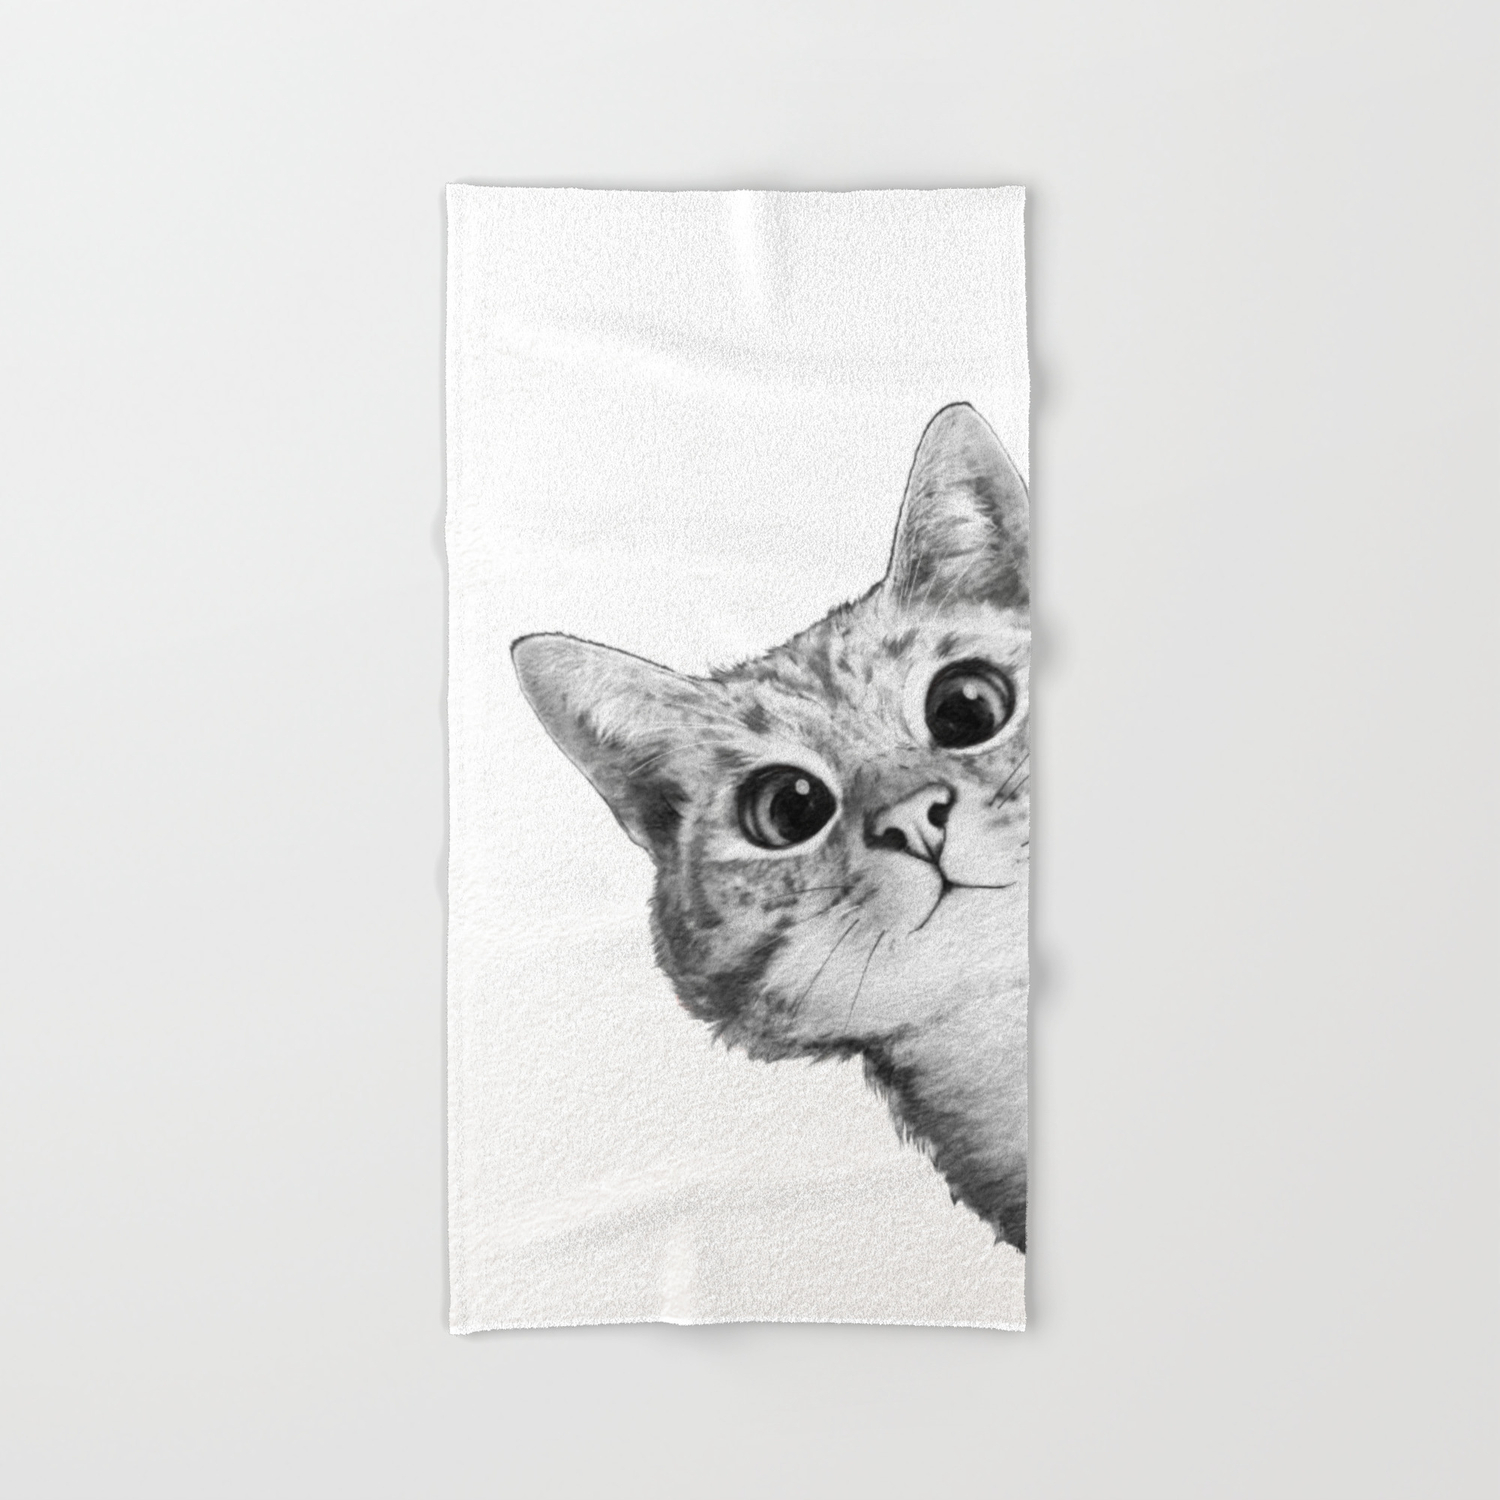 CAT KITTEN IN HAMMOCK BATH HAND KITCHEN NEW TOWELS EMBROIDERED BY LAURA 